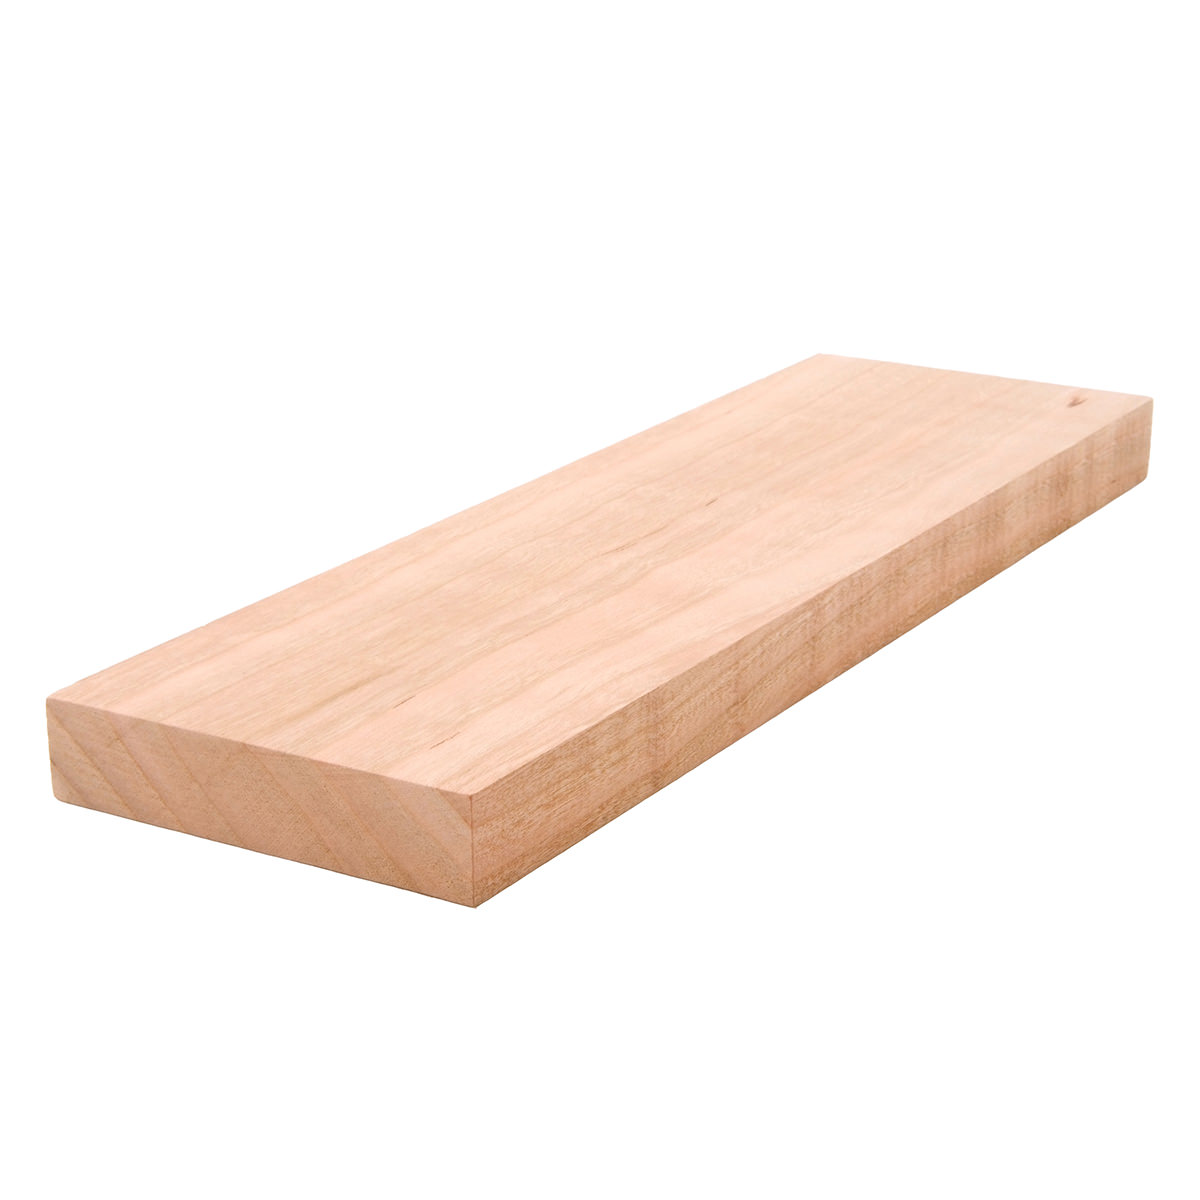 1x4 (3/4" x 31/2") Cherry S4S Lumber, Boards, & Flat Stock from Baird Brothers